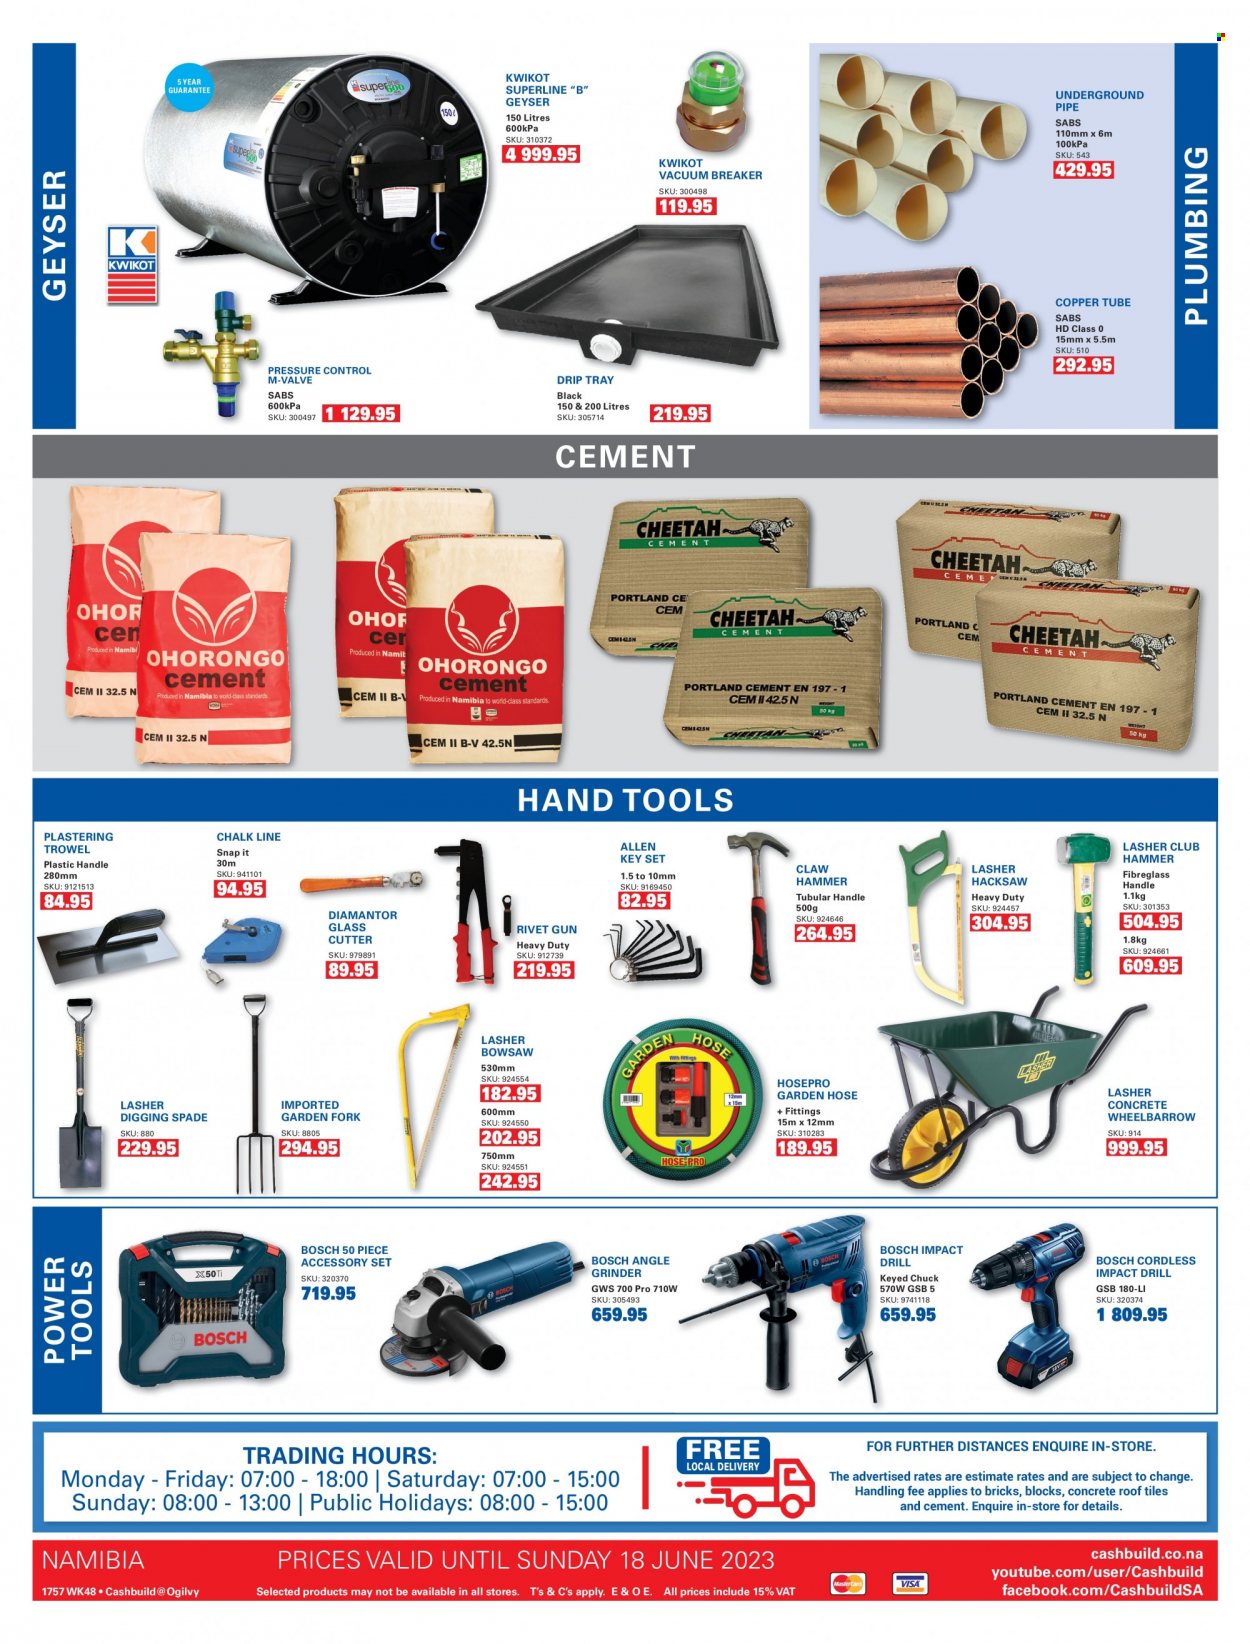 thumbnail - Cashbuild catalogue  - 22/05/2023 - 18/06/2023 - Sales products - copper tube, geyser, Bosch, drill, power tools, hammer, grinder, angle grinder, hacksaw, bowsaw, cutter, wheelbarrow, spade, glass cutter, pitchfork, claw hammer, club hammer, hand tools, garden hose. Page 3.